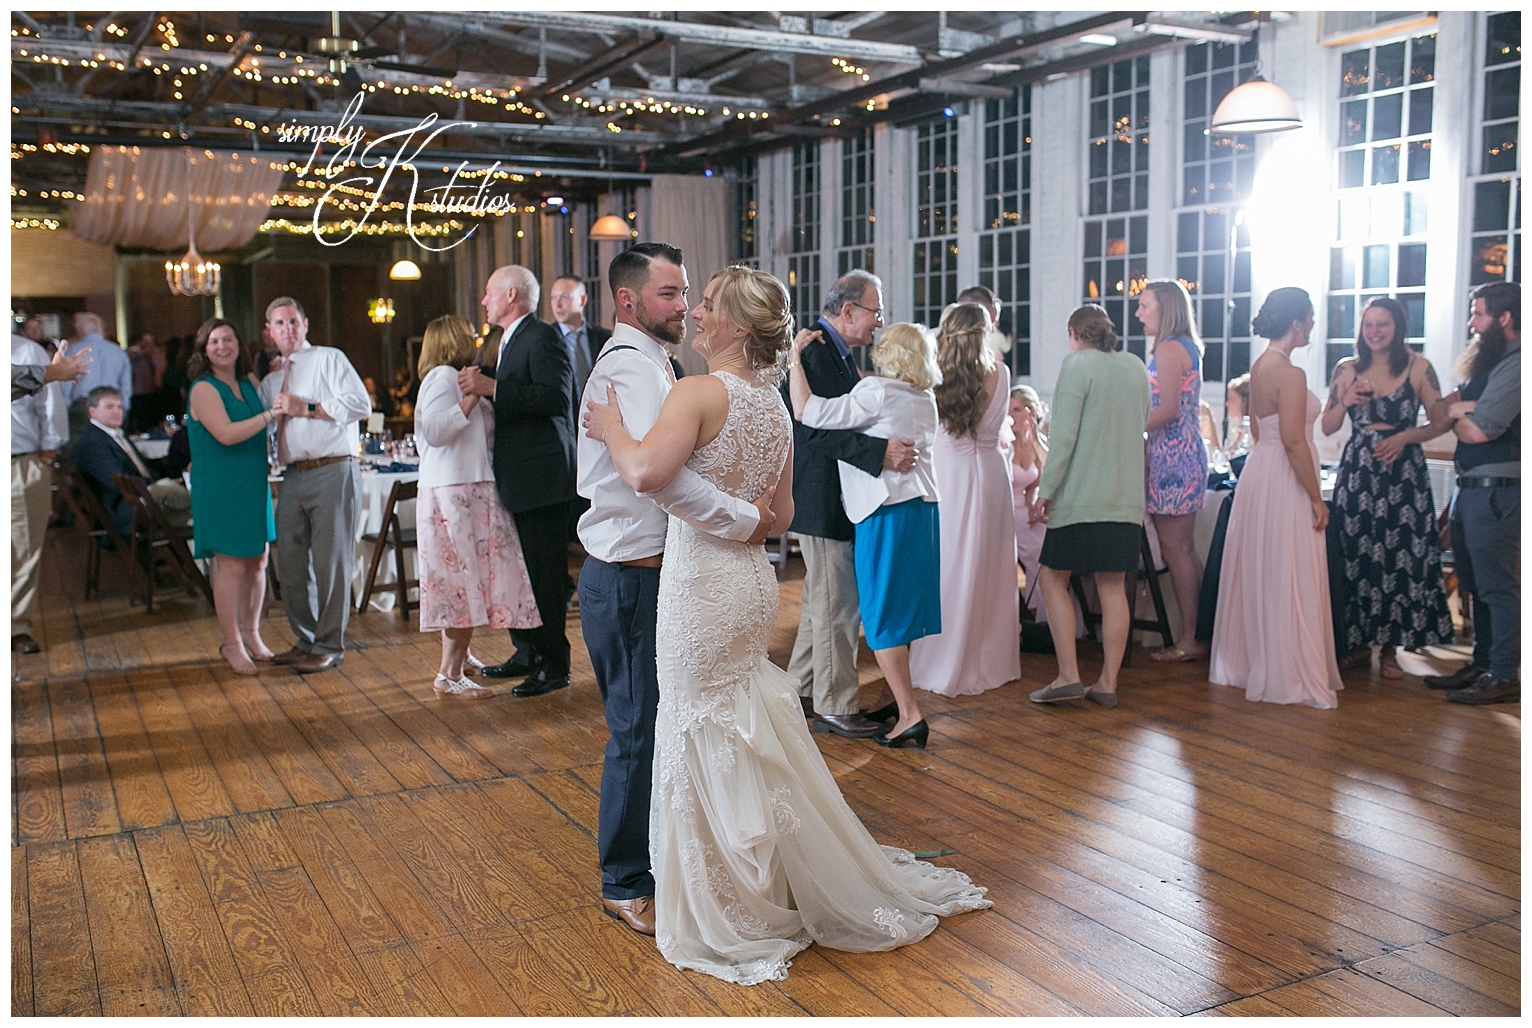 The Lace Factory Wedding Receptions.jpg